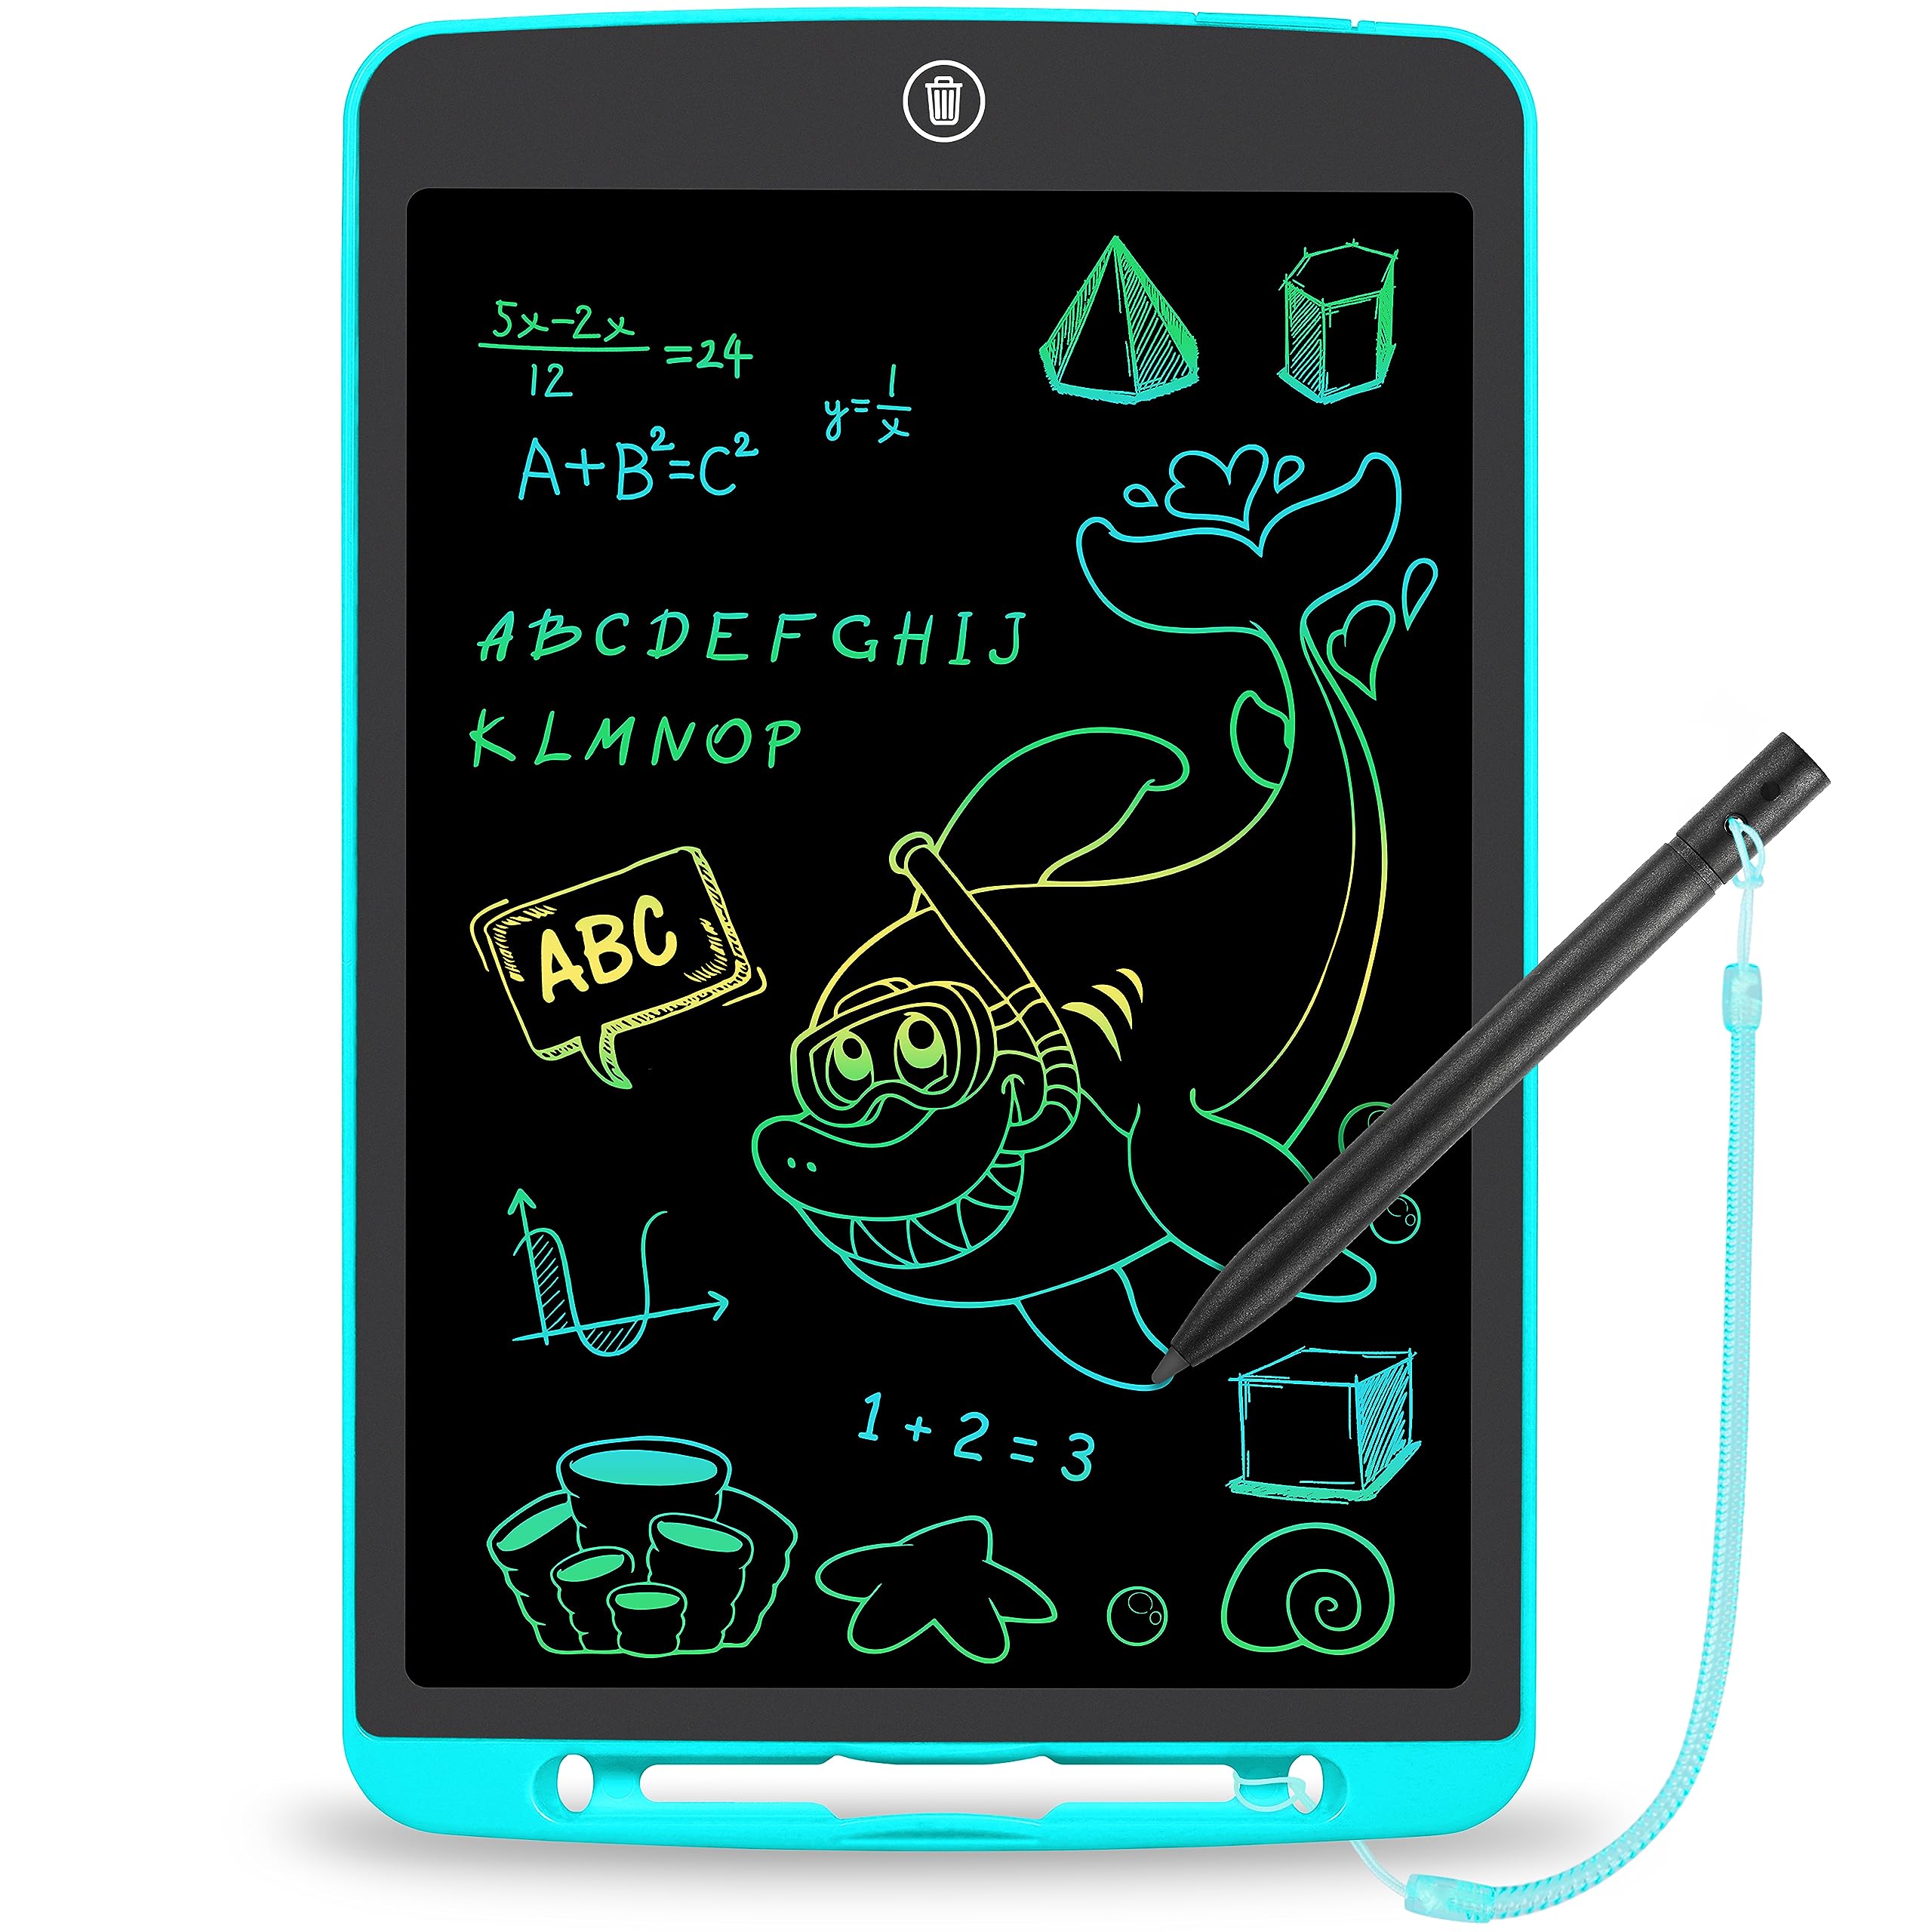 LCD Writing Tablet for Kids,12 Inch Colorful Educational Drawing Tablet, Erasable Reusable Electronic Writing Board, Toddler Doodle Board, Learning Toy Gift for Boys Girls Ages 3-8(Sky Blue)